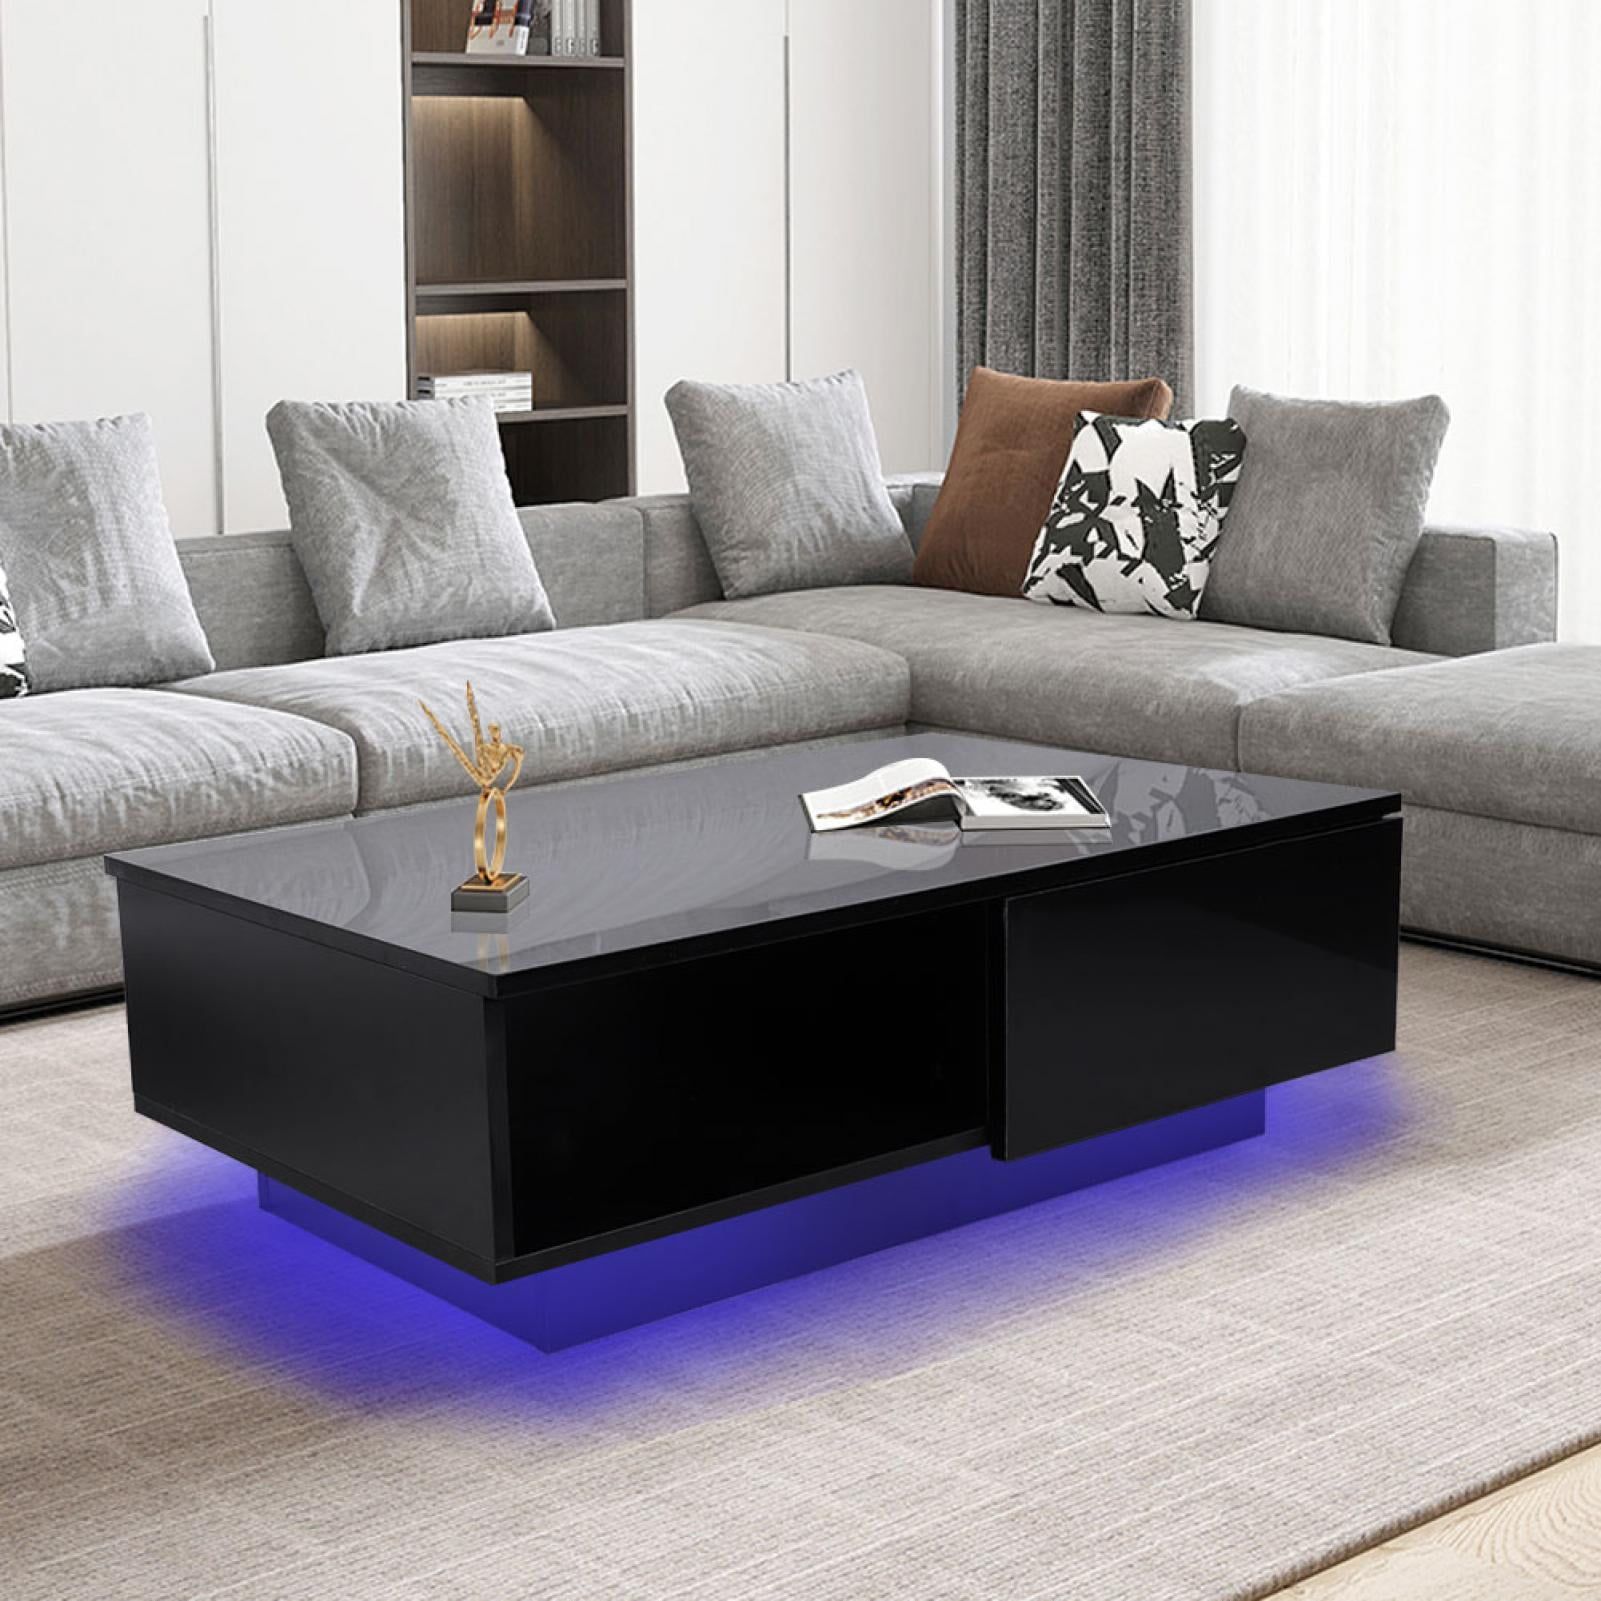 Ebtools Led 37inch High Gloss Coffee Table, Black Lithuania | Ubuy Throughout Coffee Tables With Led Lights (View 5 of 15)